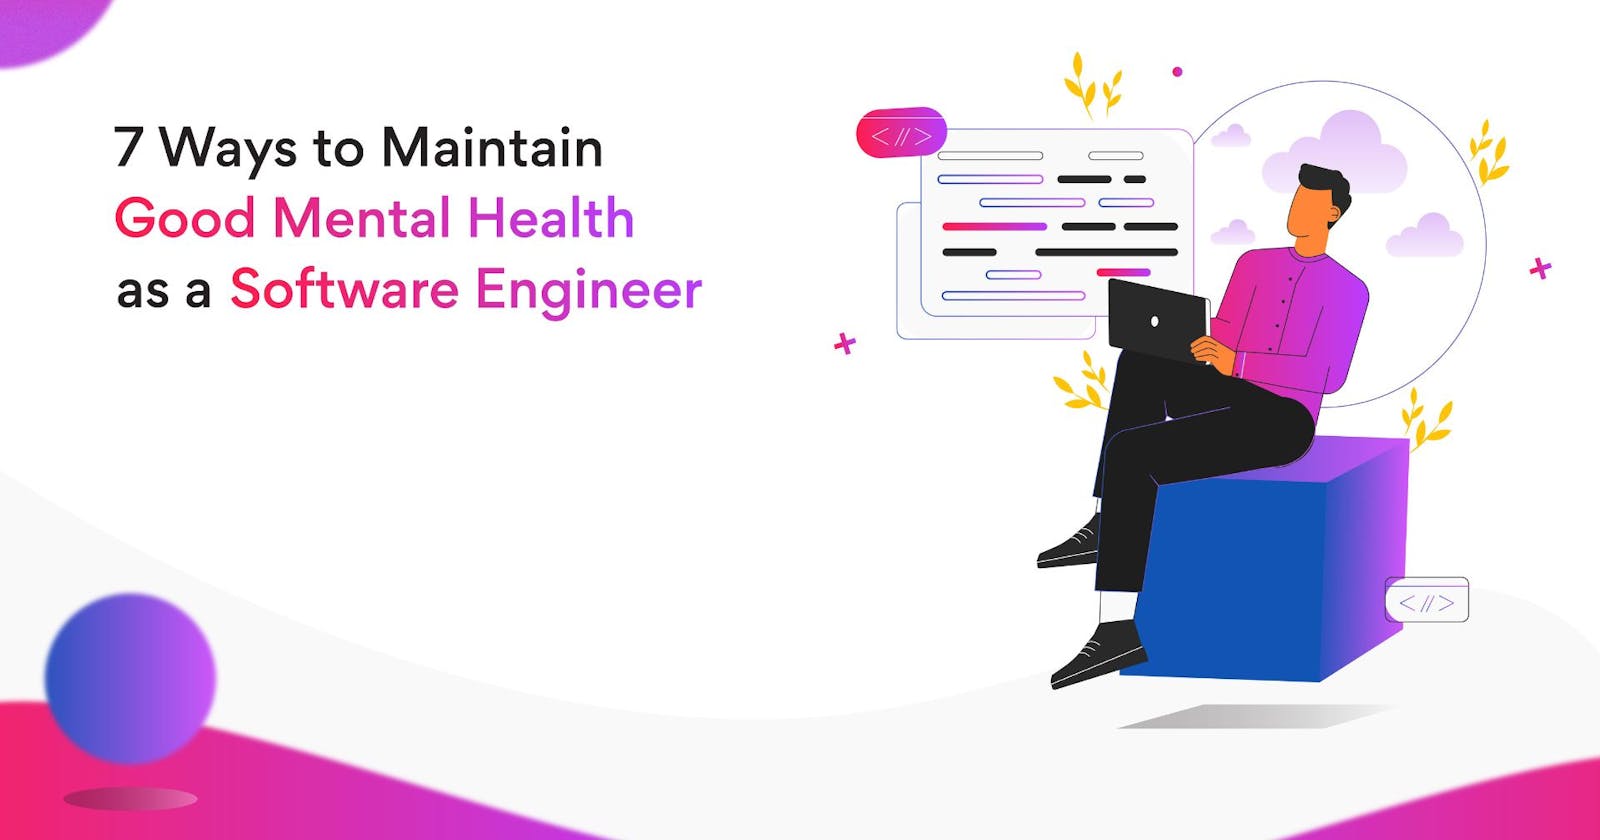 7 Ways for Maintaining Good Mental Health as a Software Engineer